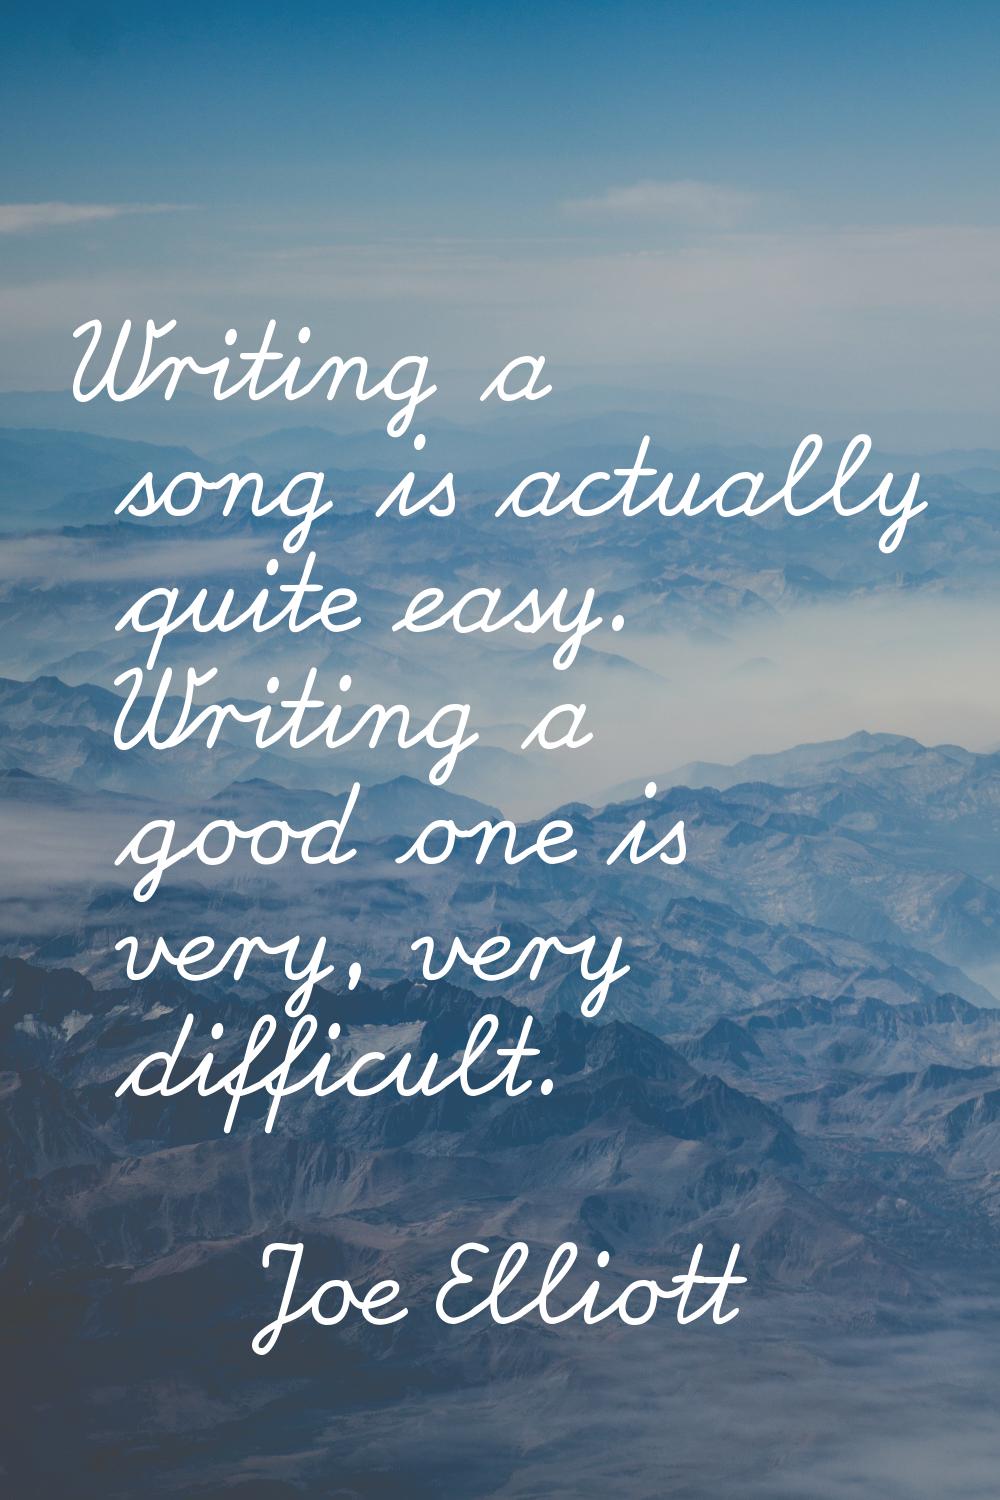 Writing a song is actually quite easy. Writing a good one is very, very difficult.